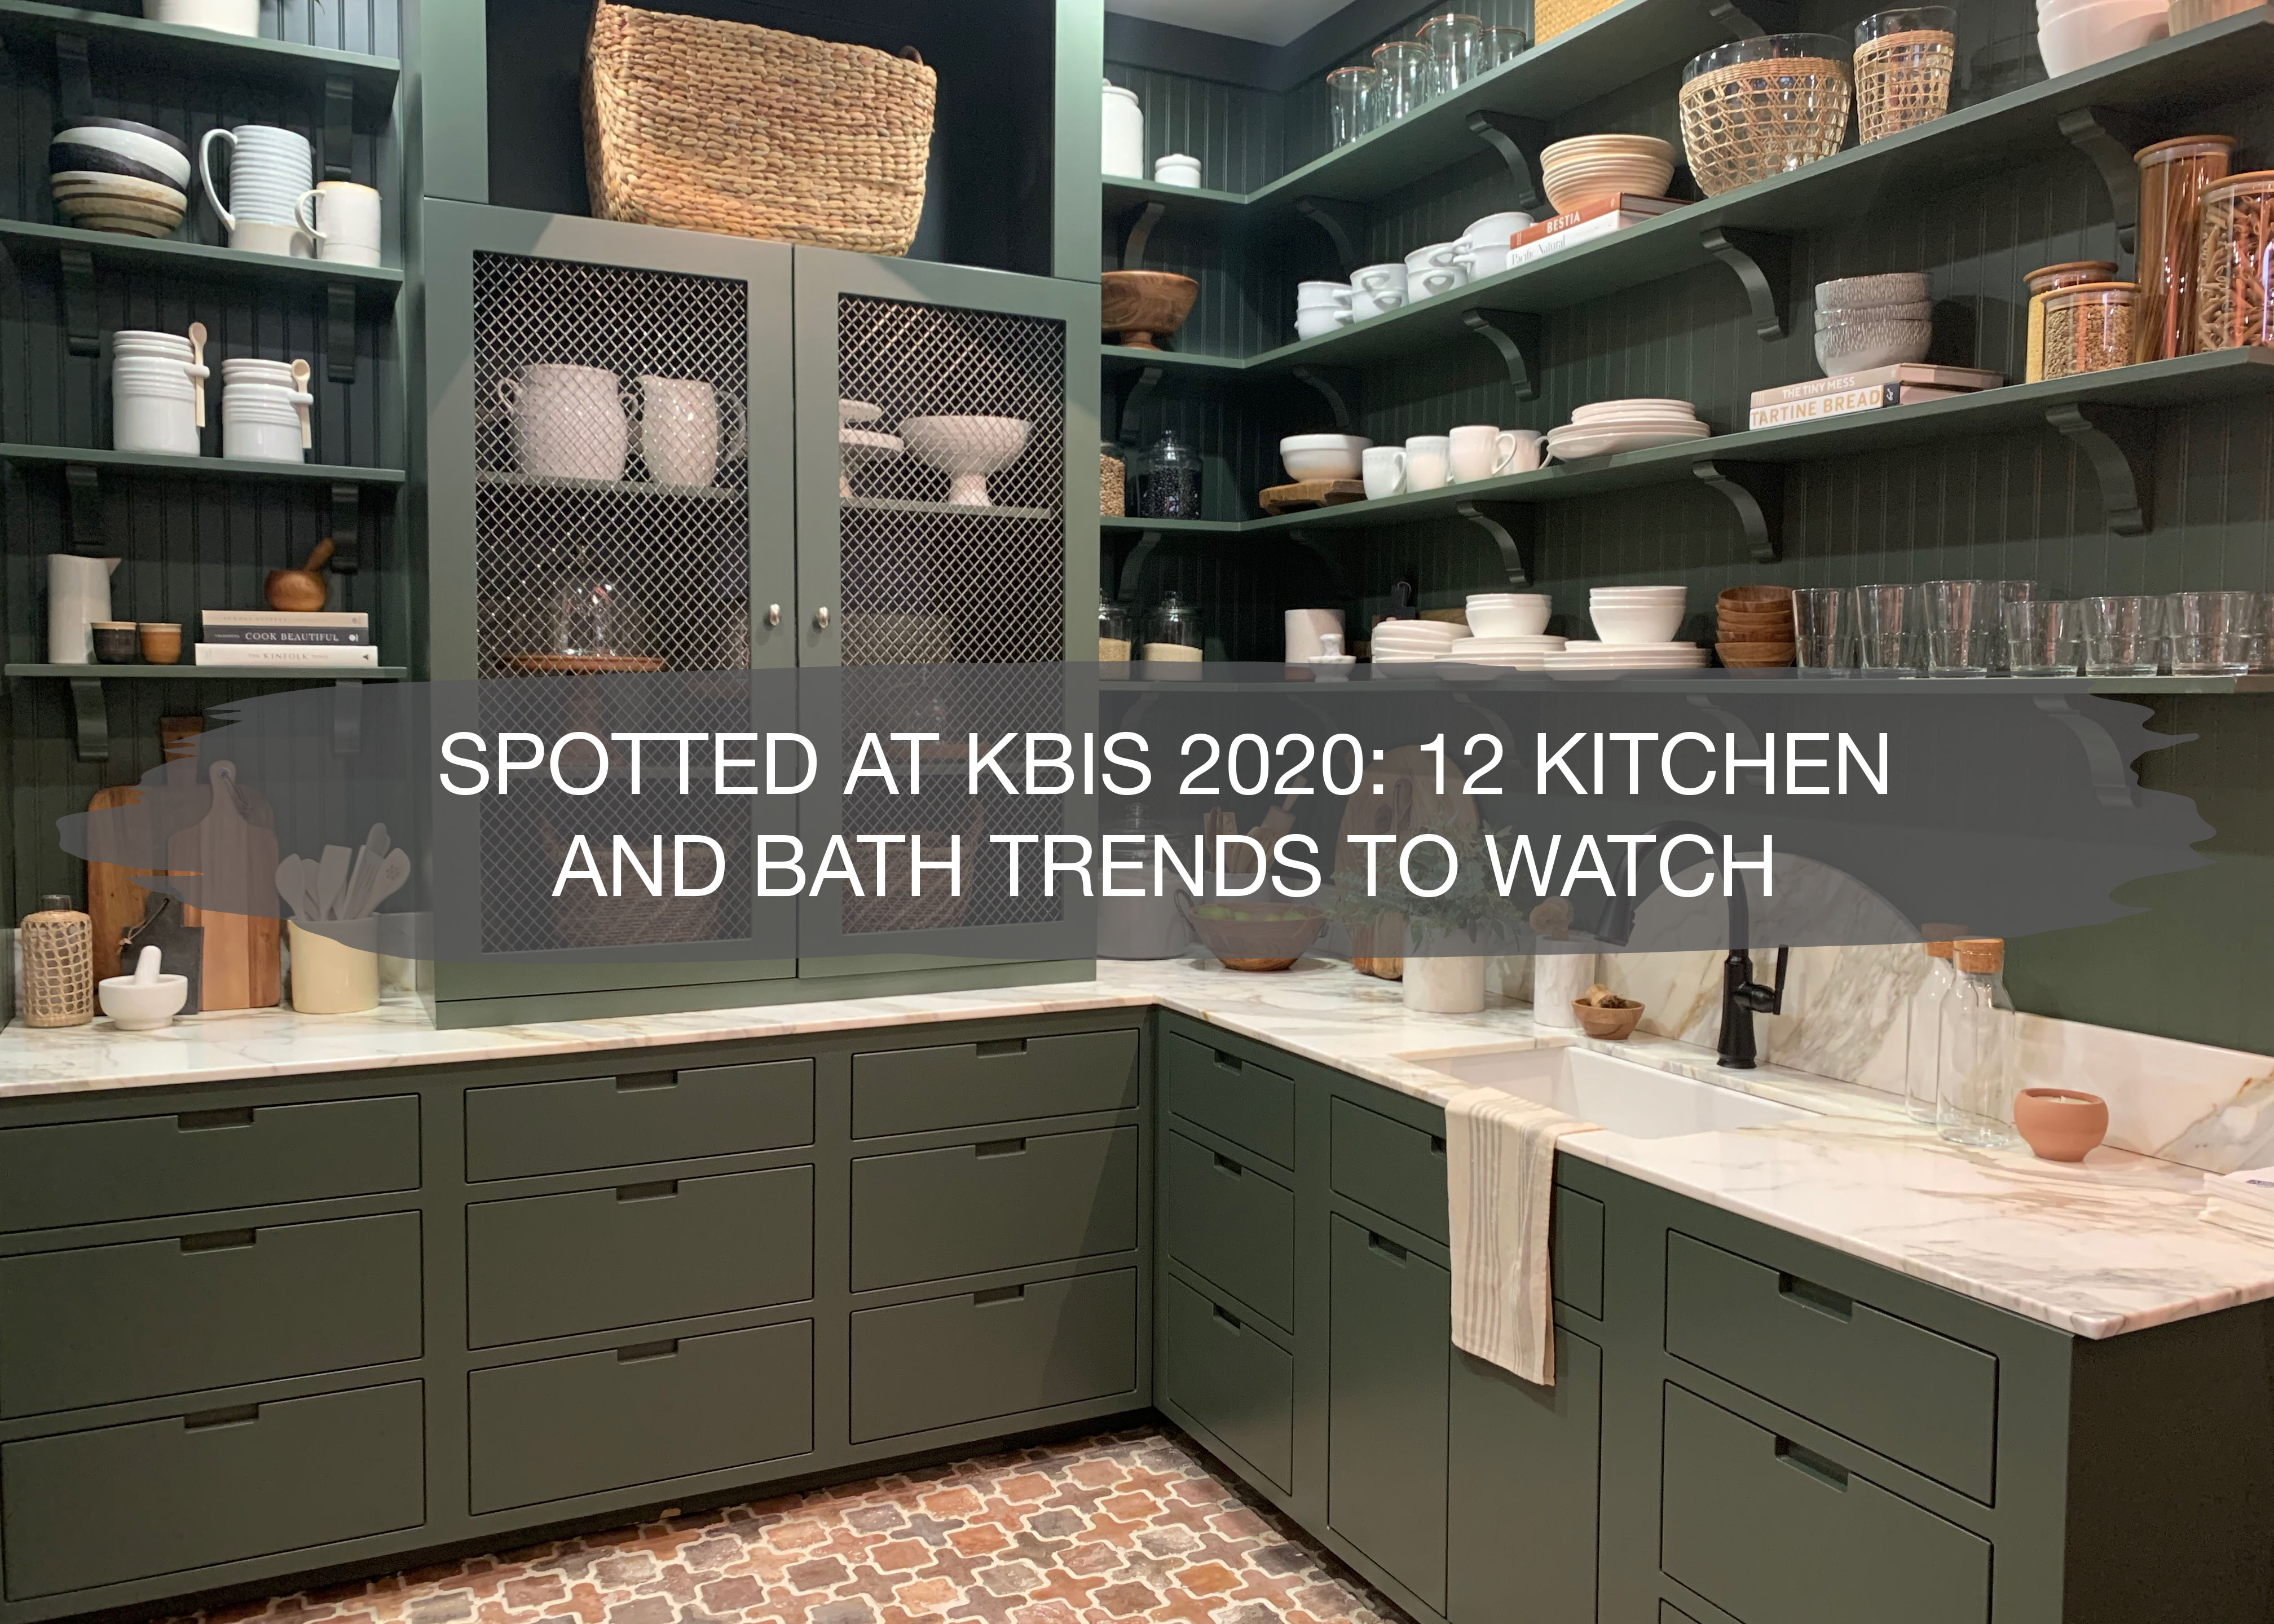 Spotted at KBIS 2020: 12 Kitchen and Bath Trends to Watch 9